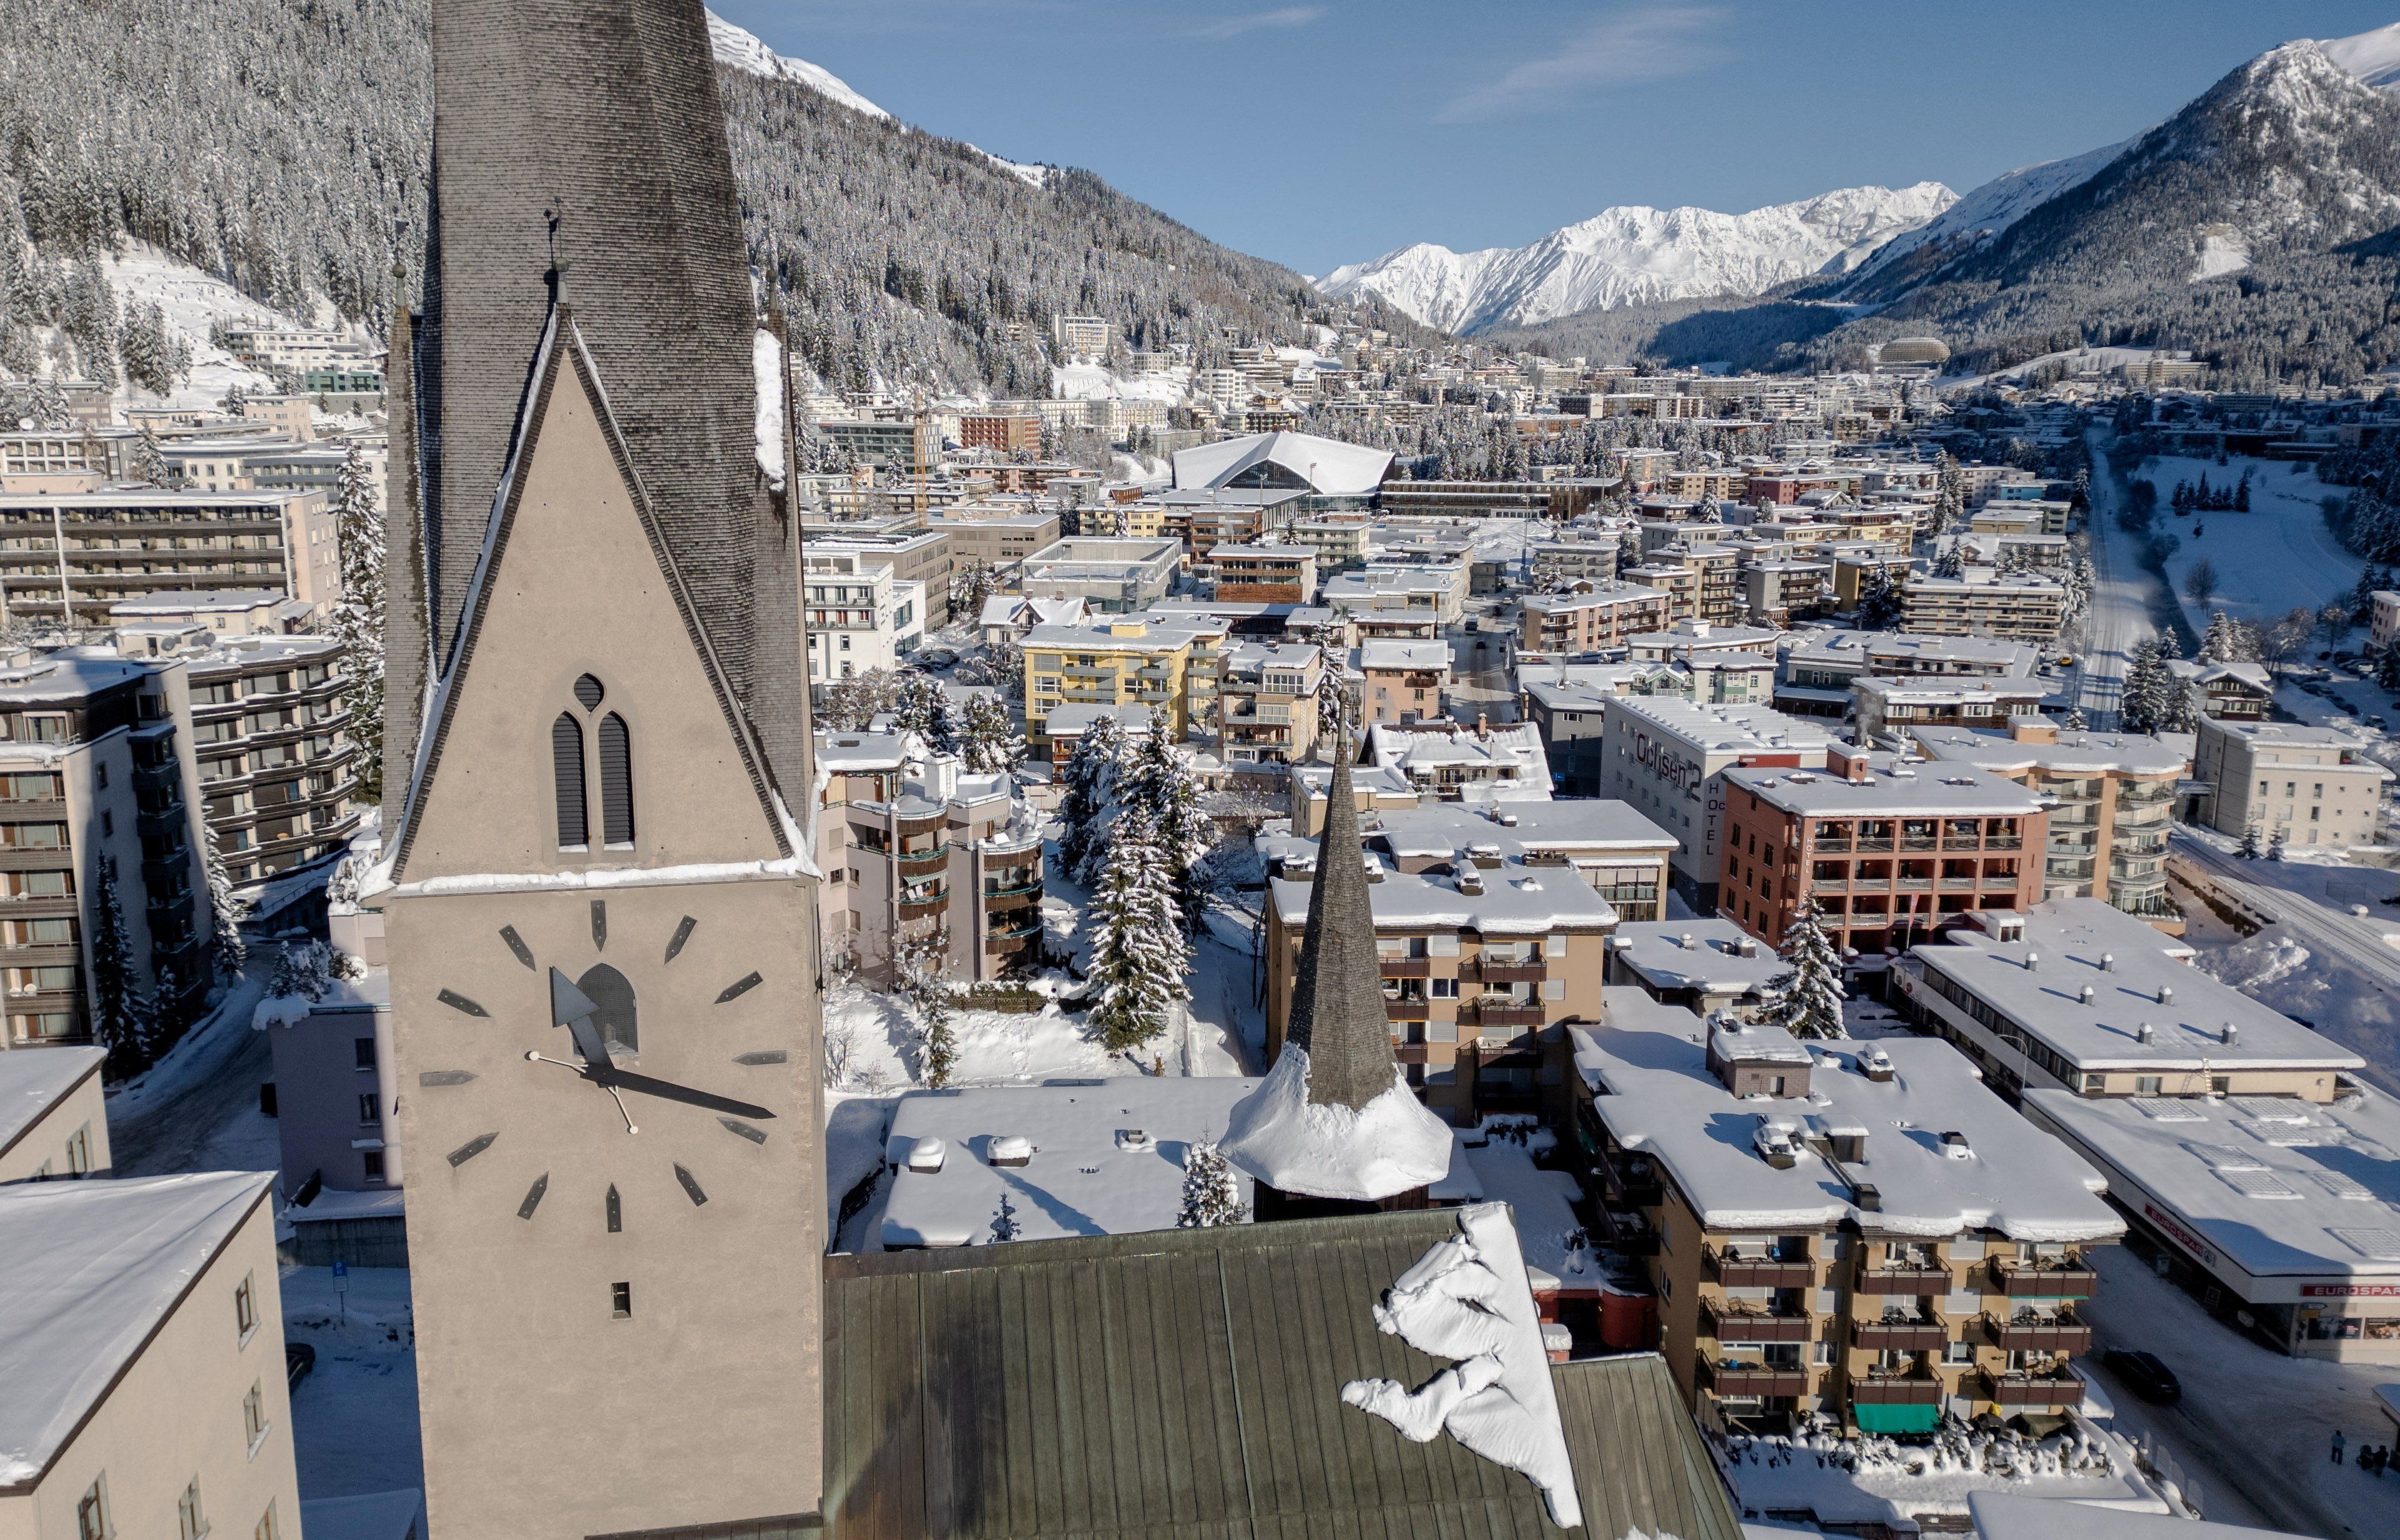 Skyline view of Davos, Switz., with the St. Johann church in the foreground. 